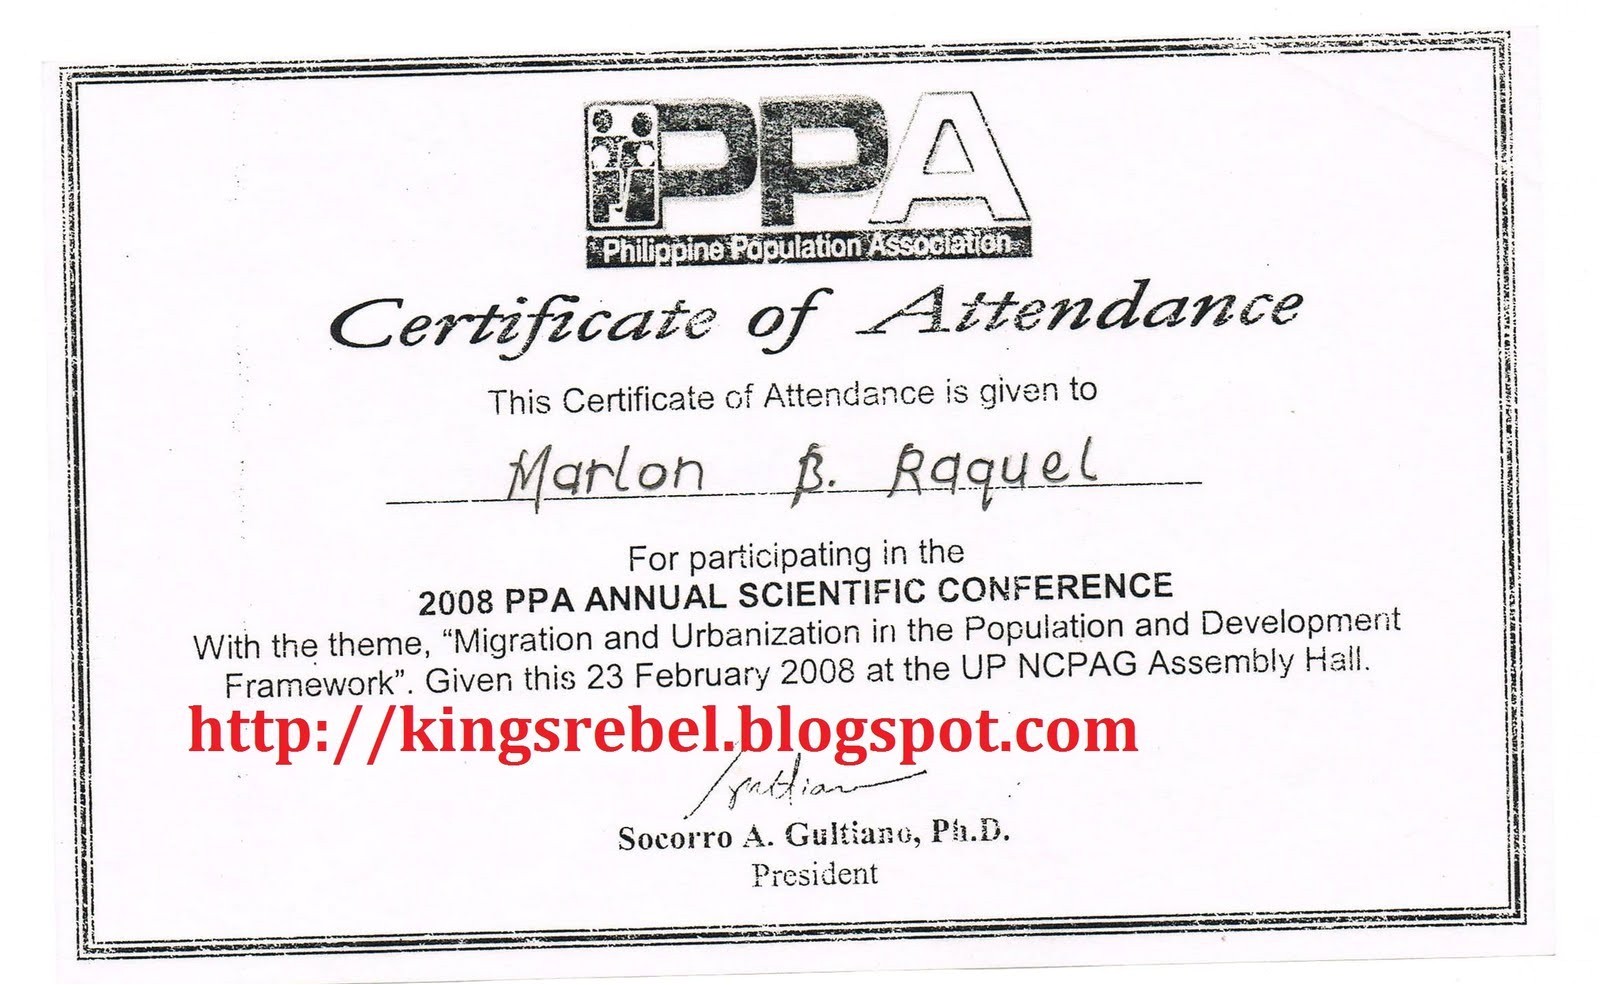 fresh conference participation certificate templates new conference attendance certificate samples fresh template conference